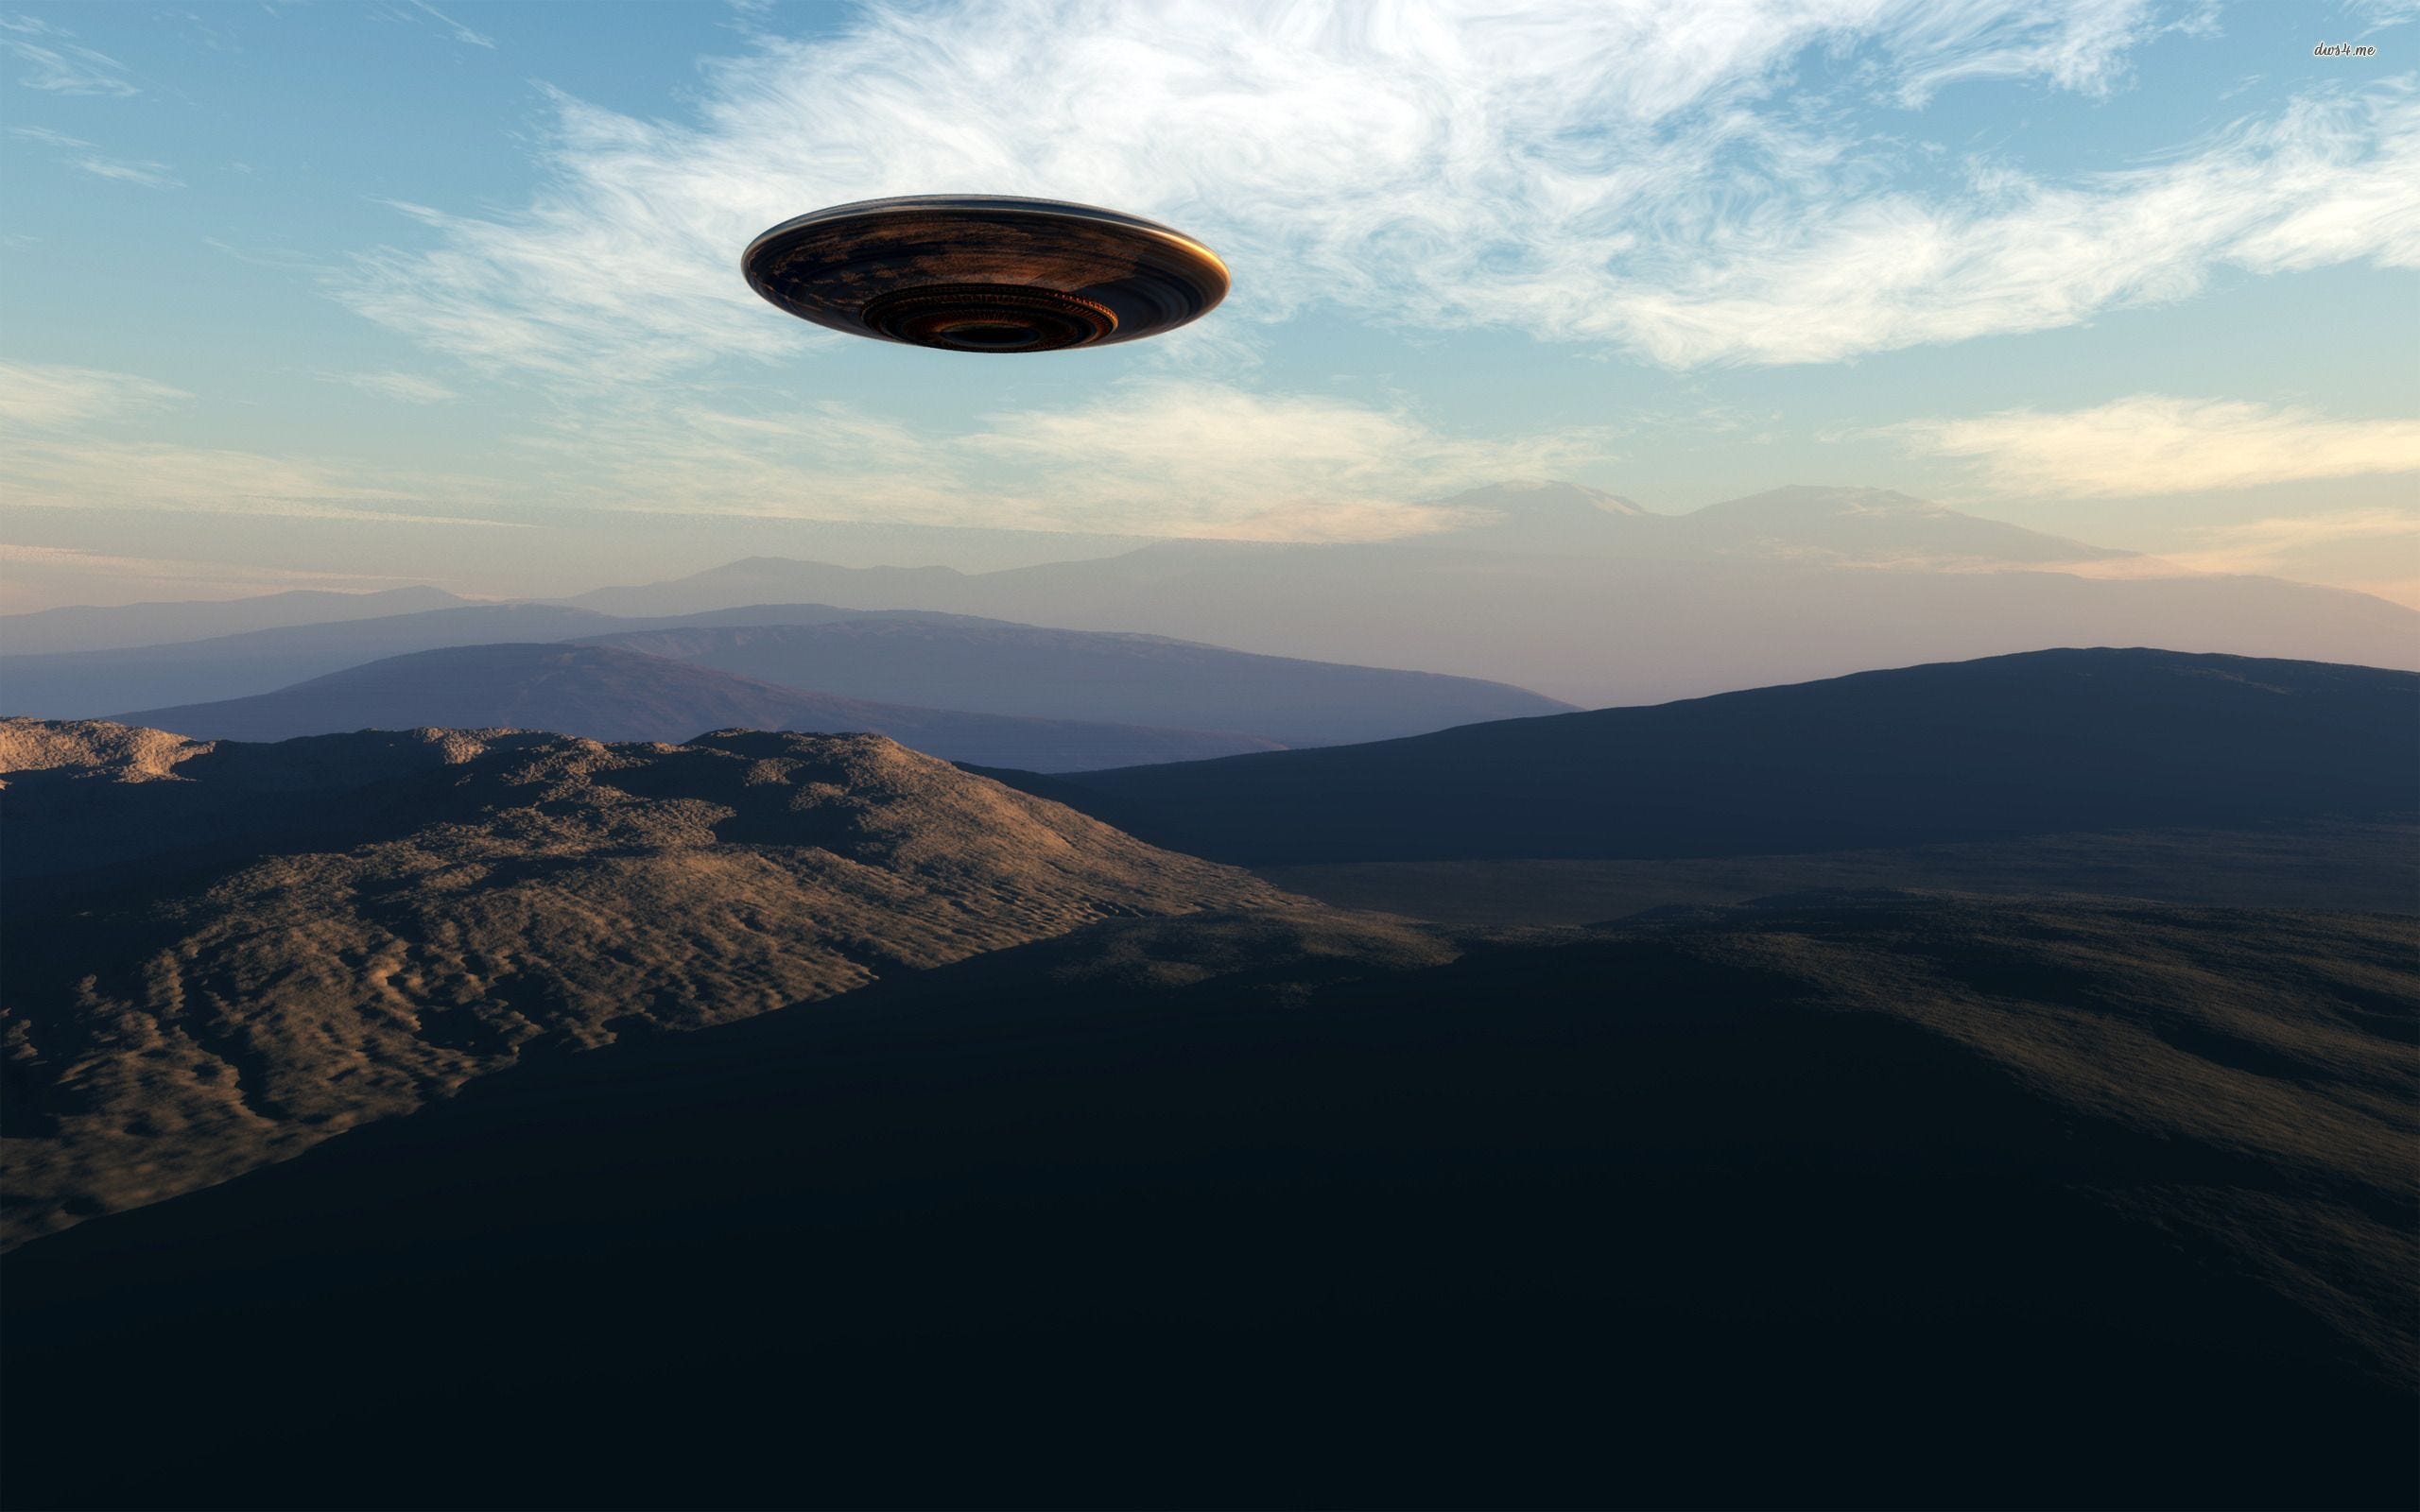 The Roswell Incident and Recent UFO Disclosure Developments